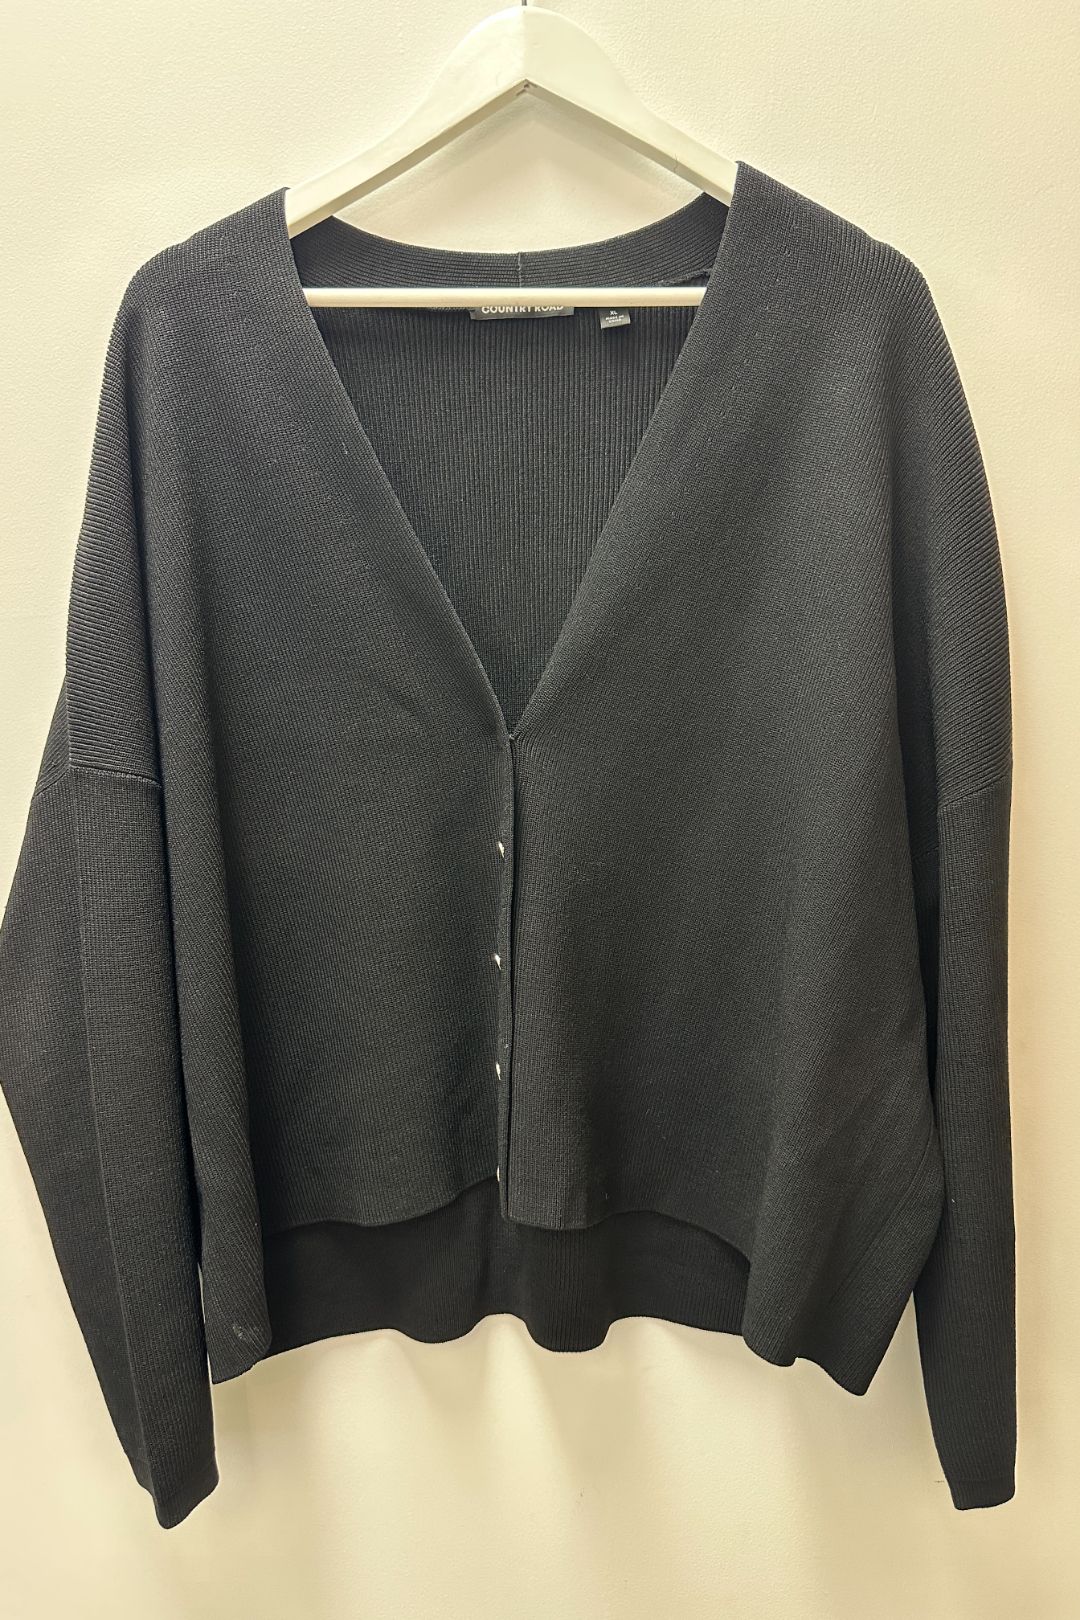 Country Road Black Box Style Cardigan